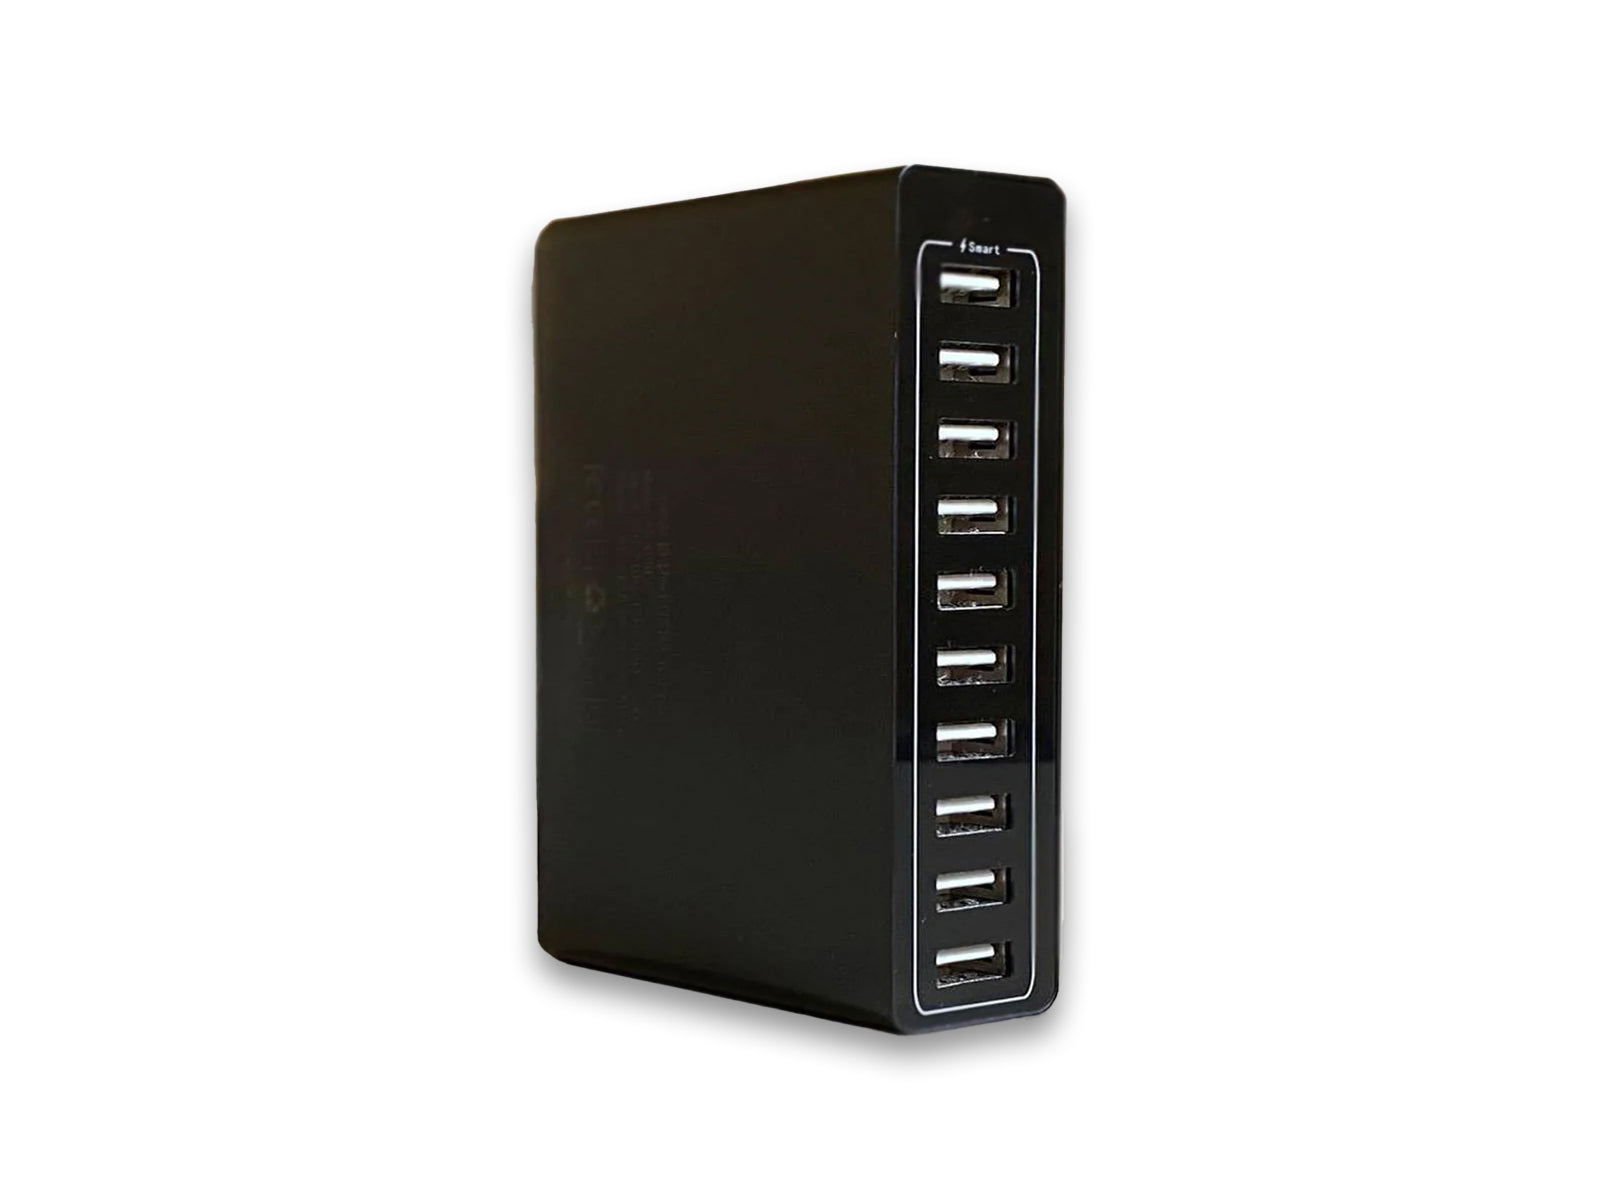 Tekeir 10 Port USB Charging Hub Angled Front View